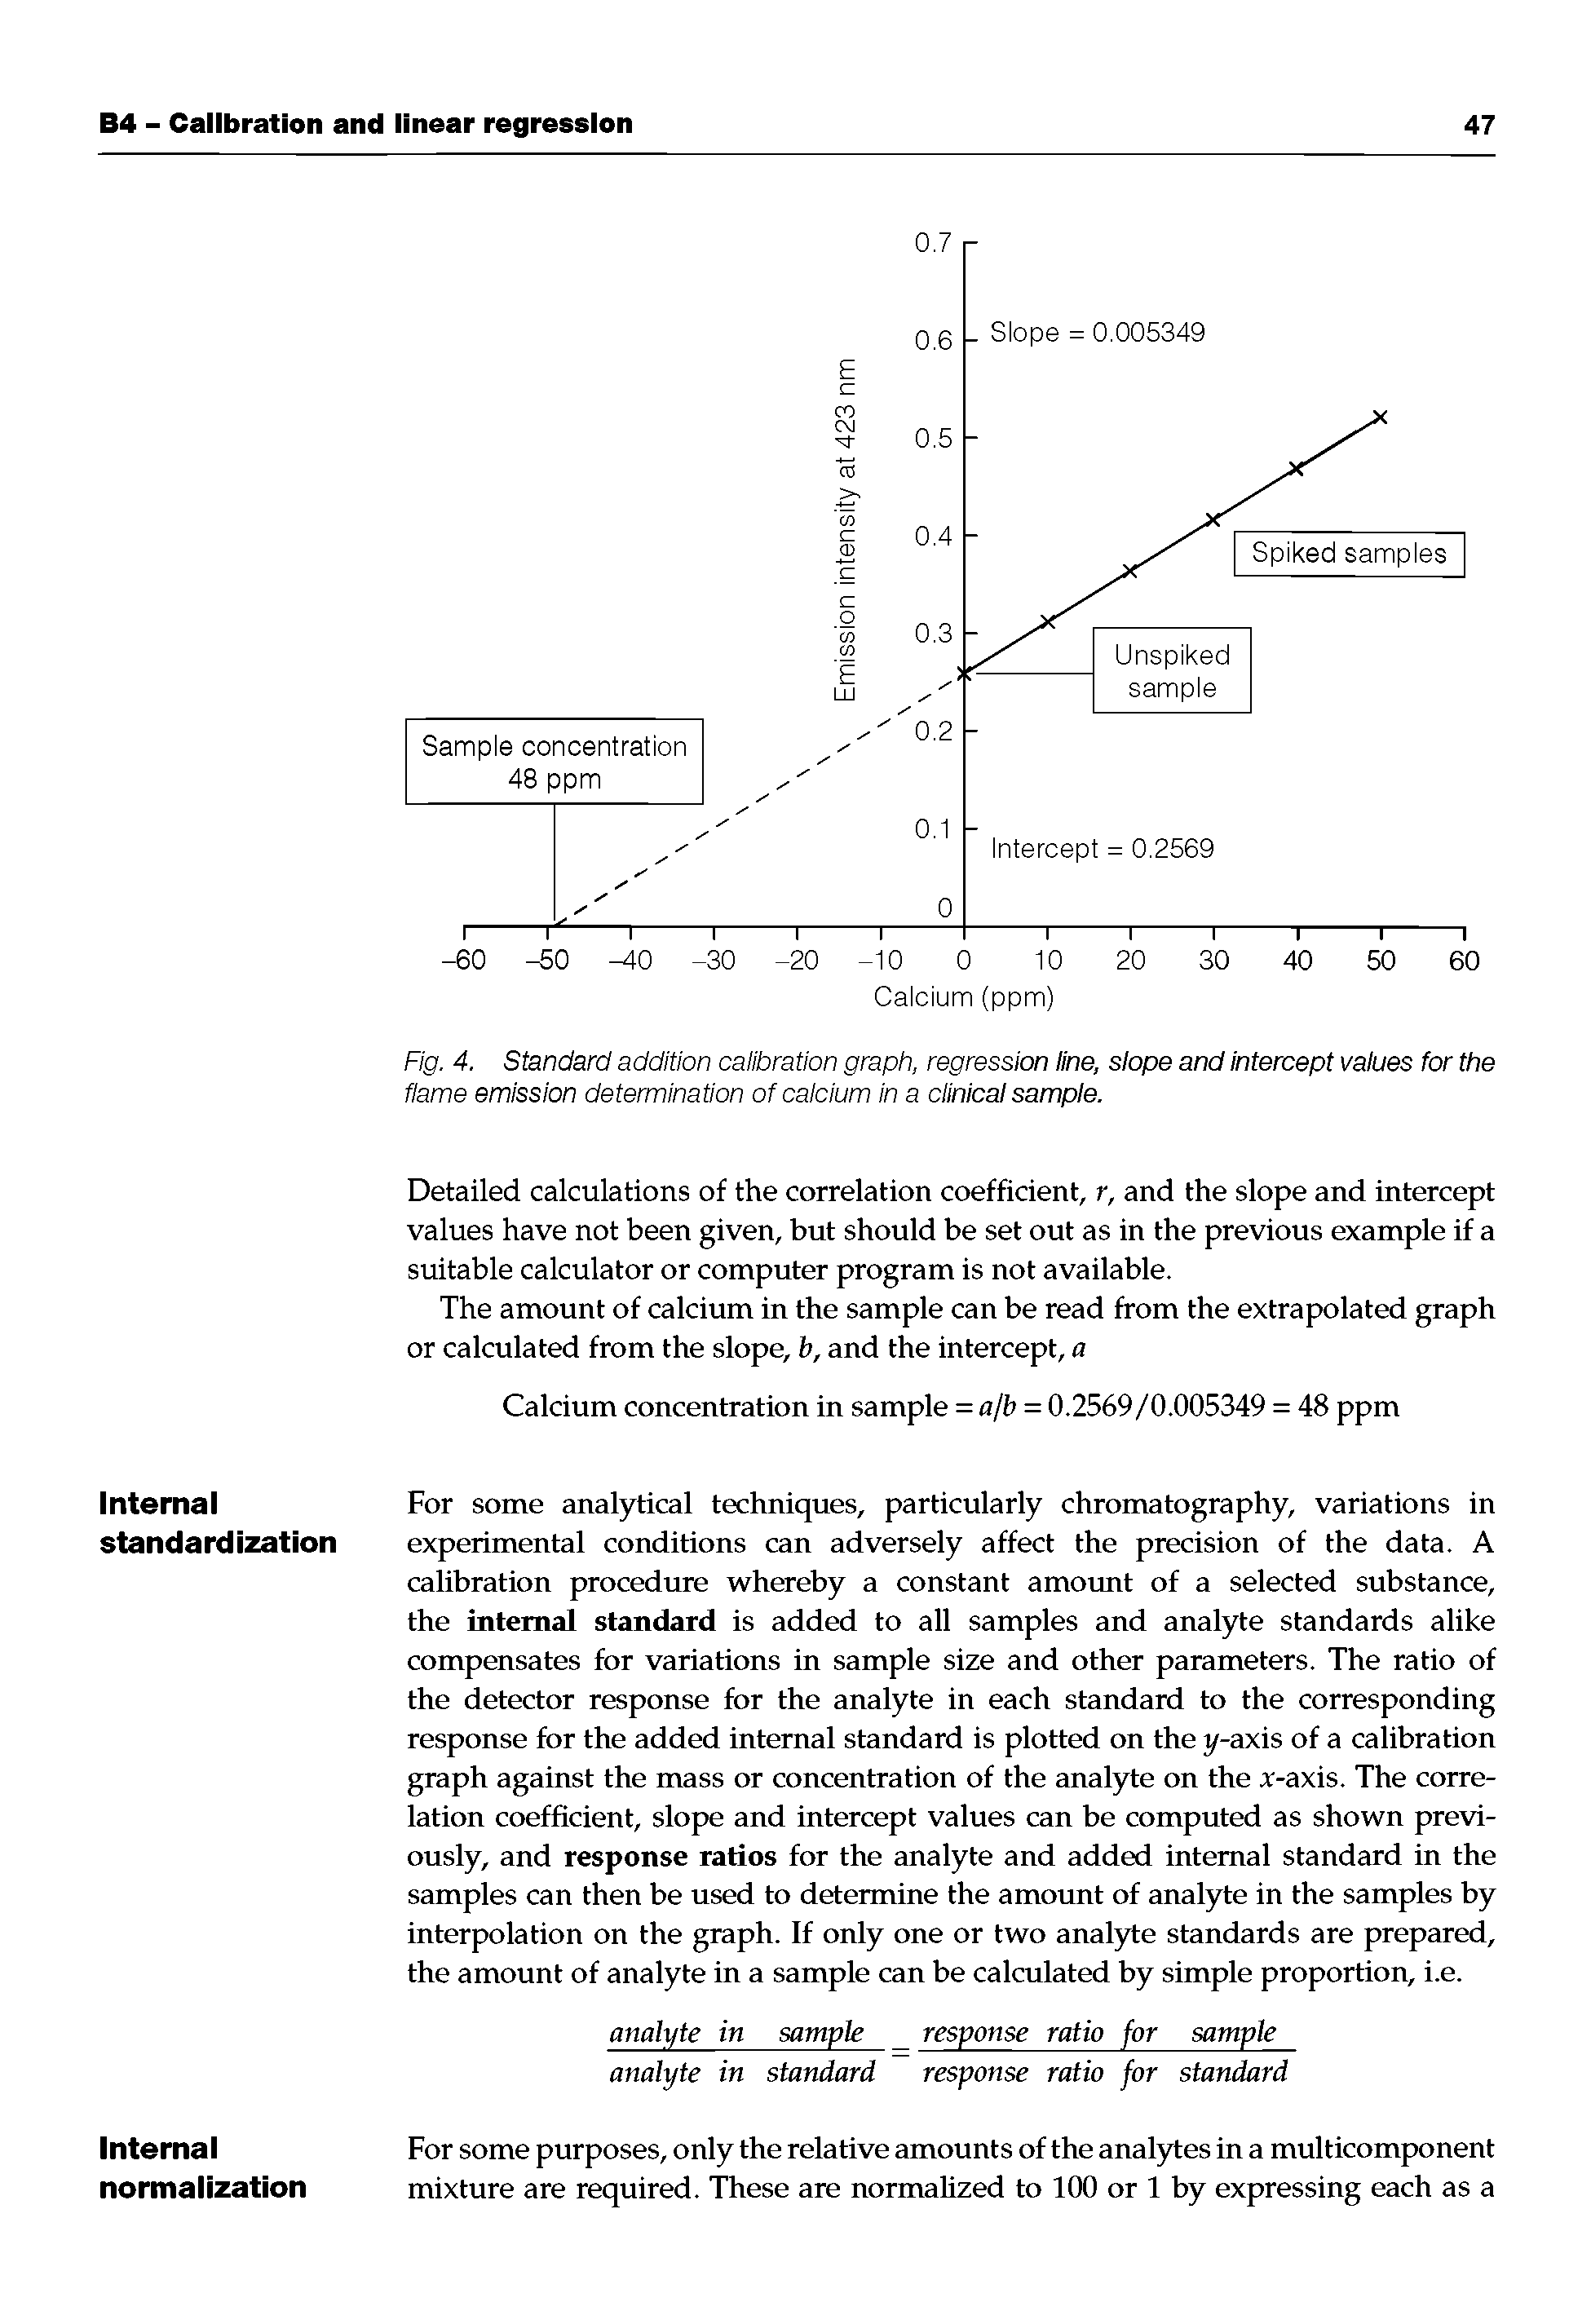 Fig. 4. Standard addition caiibration graph, regression line, slope and intercept values for the flame emission determination of calcium in a clinical sample.